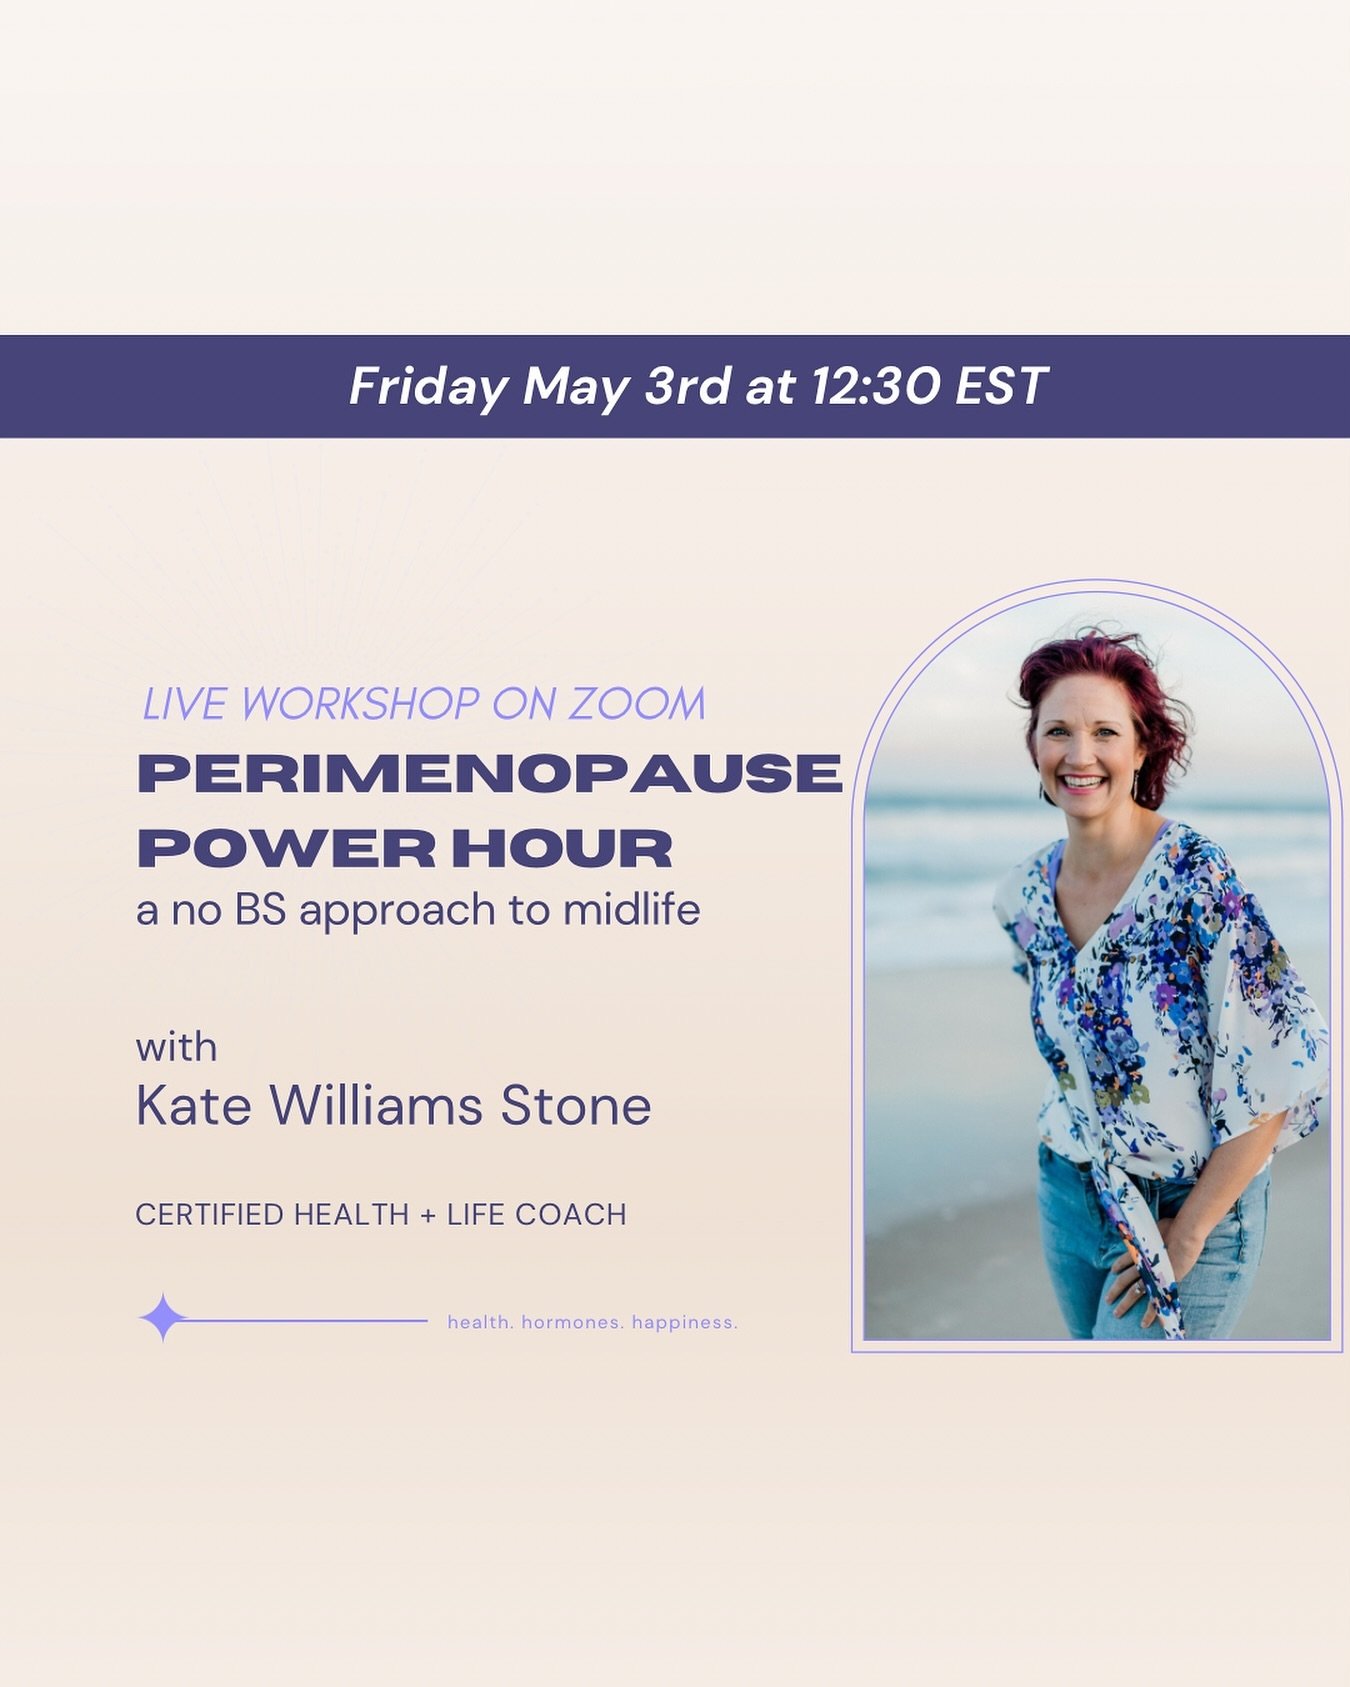 🌟 Join me on Friday May 3rd at 12:30 EST for a FREE workshop! 🌟

At 41, I found myself battling fatigue, brain fog, and heavy periods. But when I turned to my doctor for answers about perimenopause, I was brushed  off as &ldquo;too young.&rdquo; So